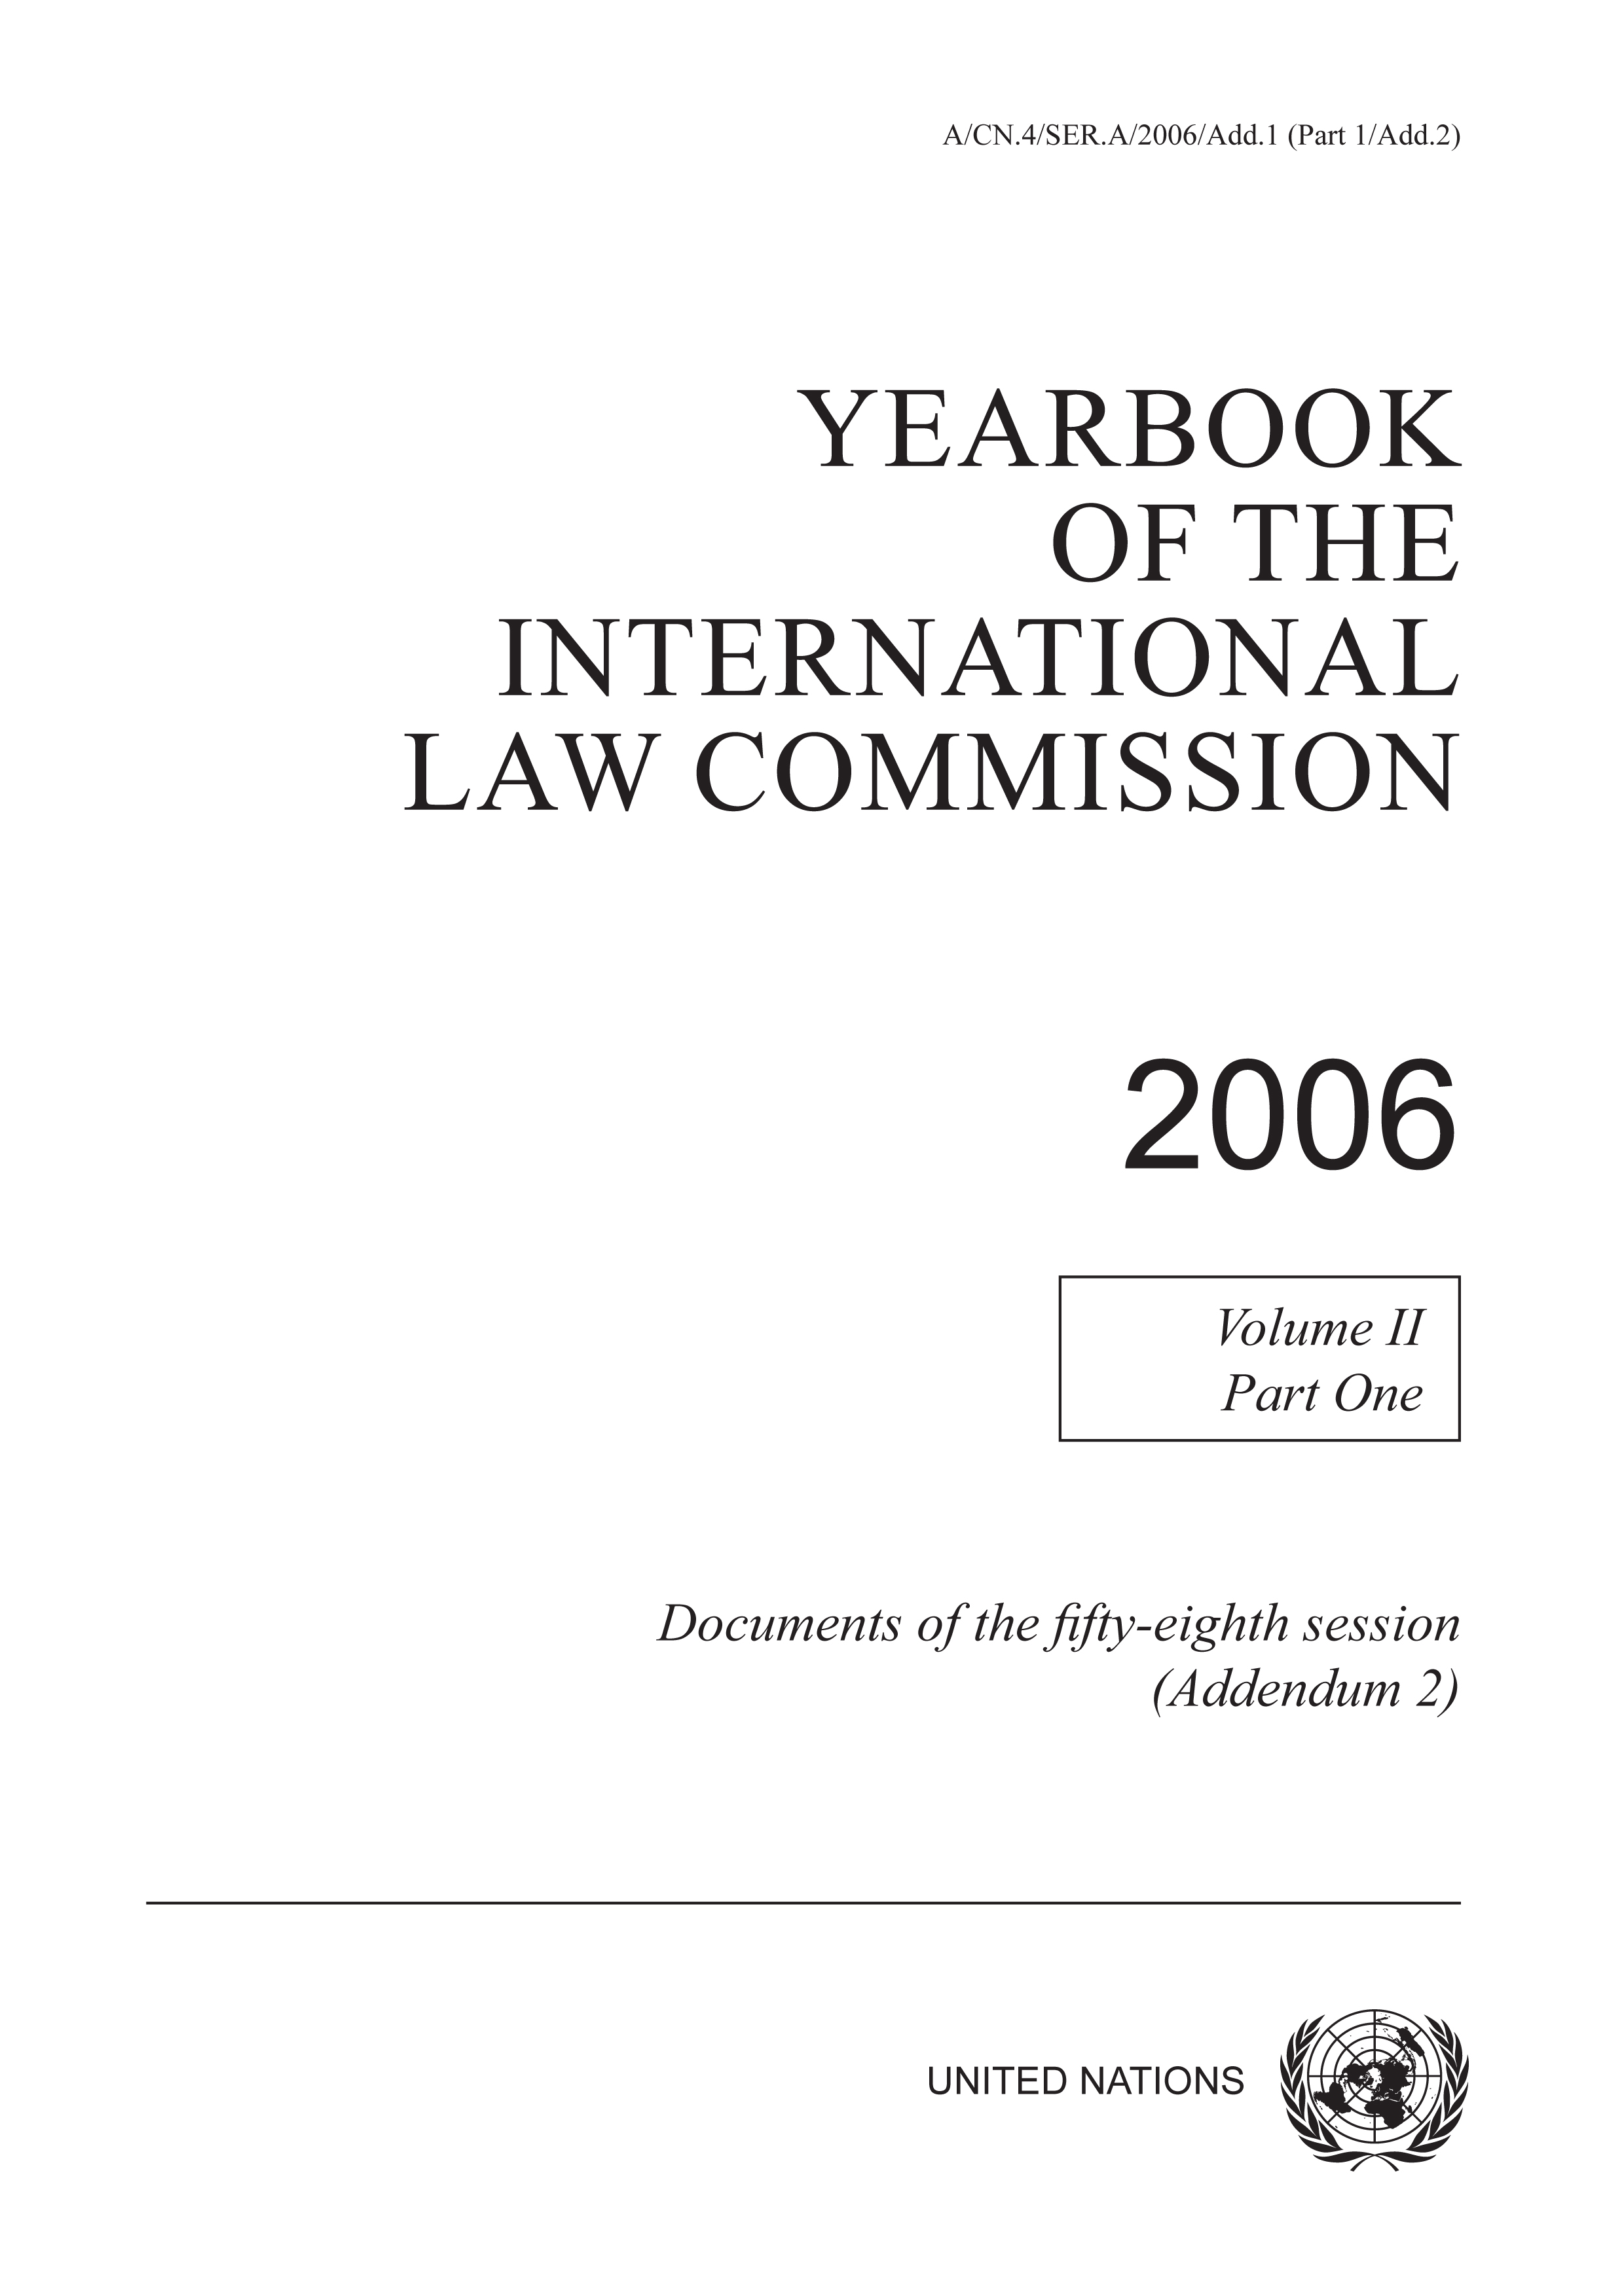 image of Yearbook of the International Law Commission 2006, Vol. II, Part 1 (Addendum 2)